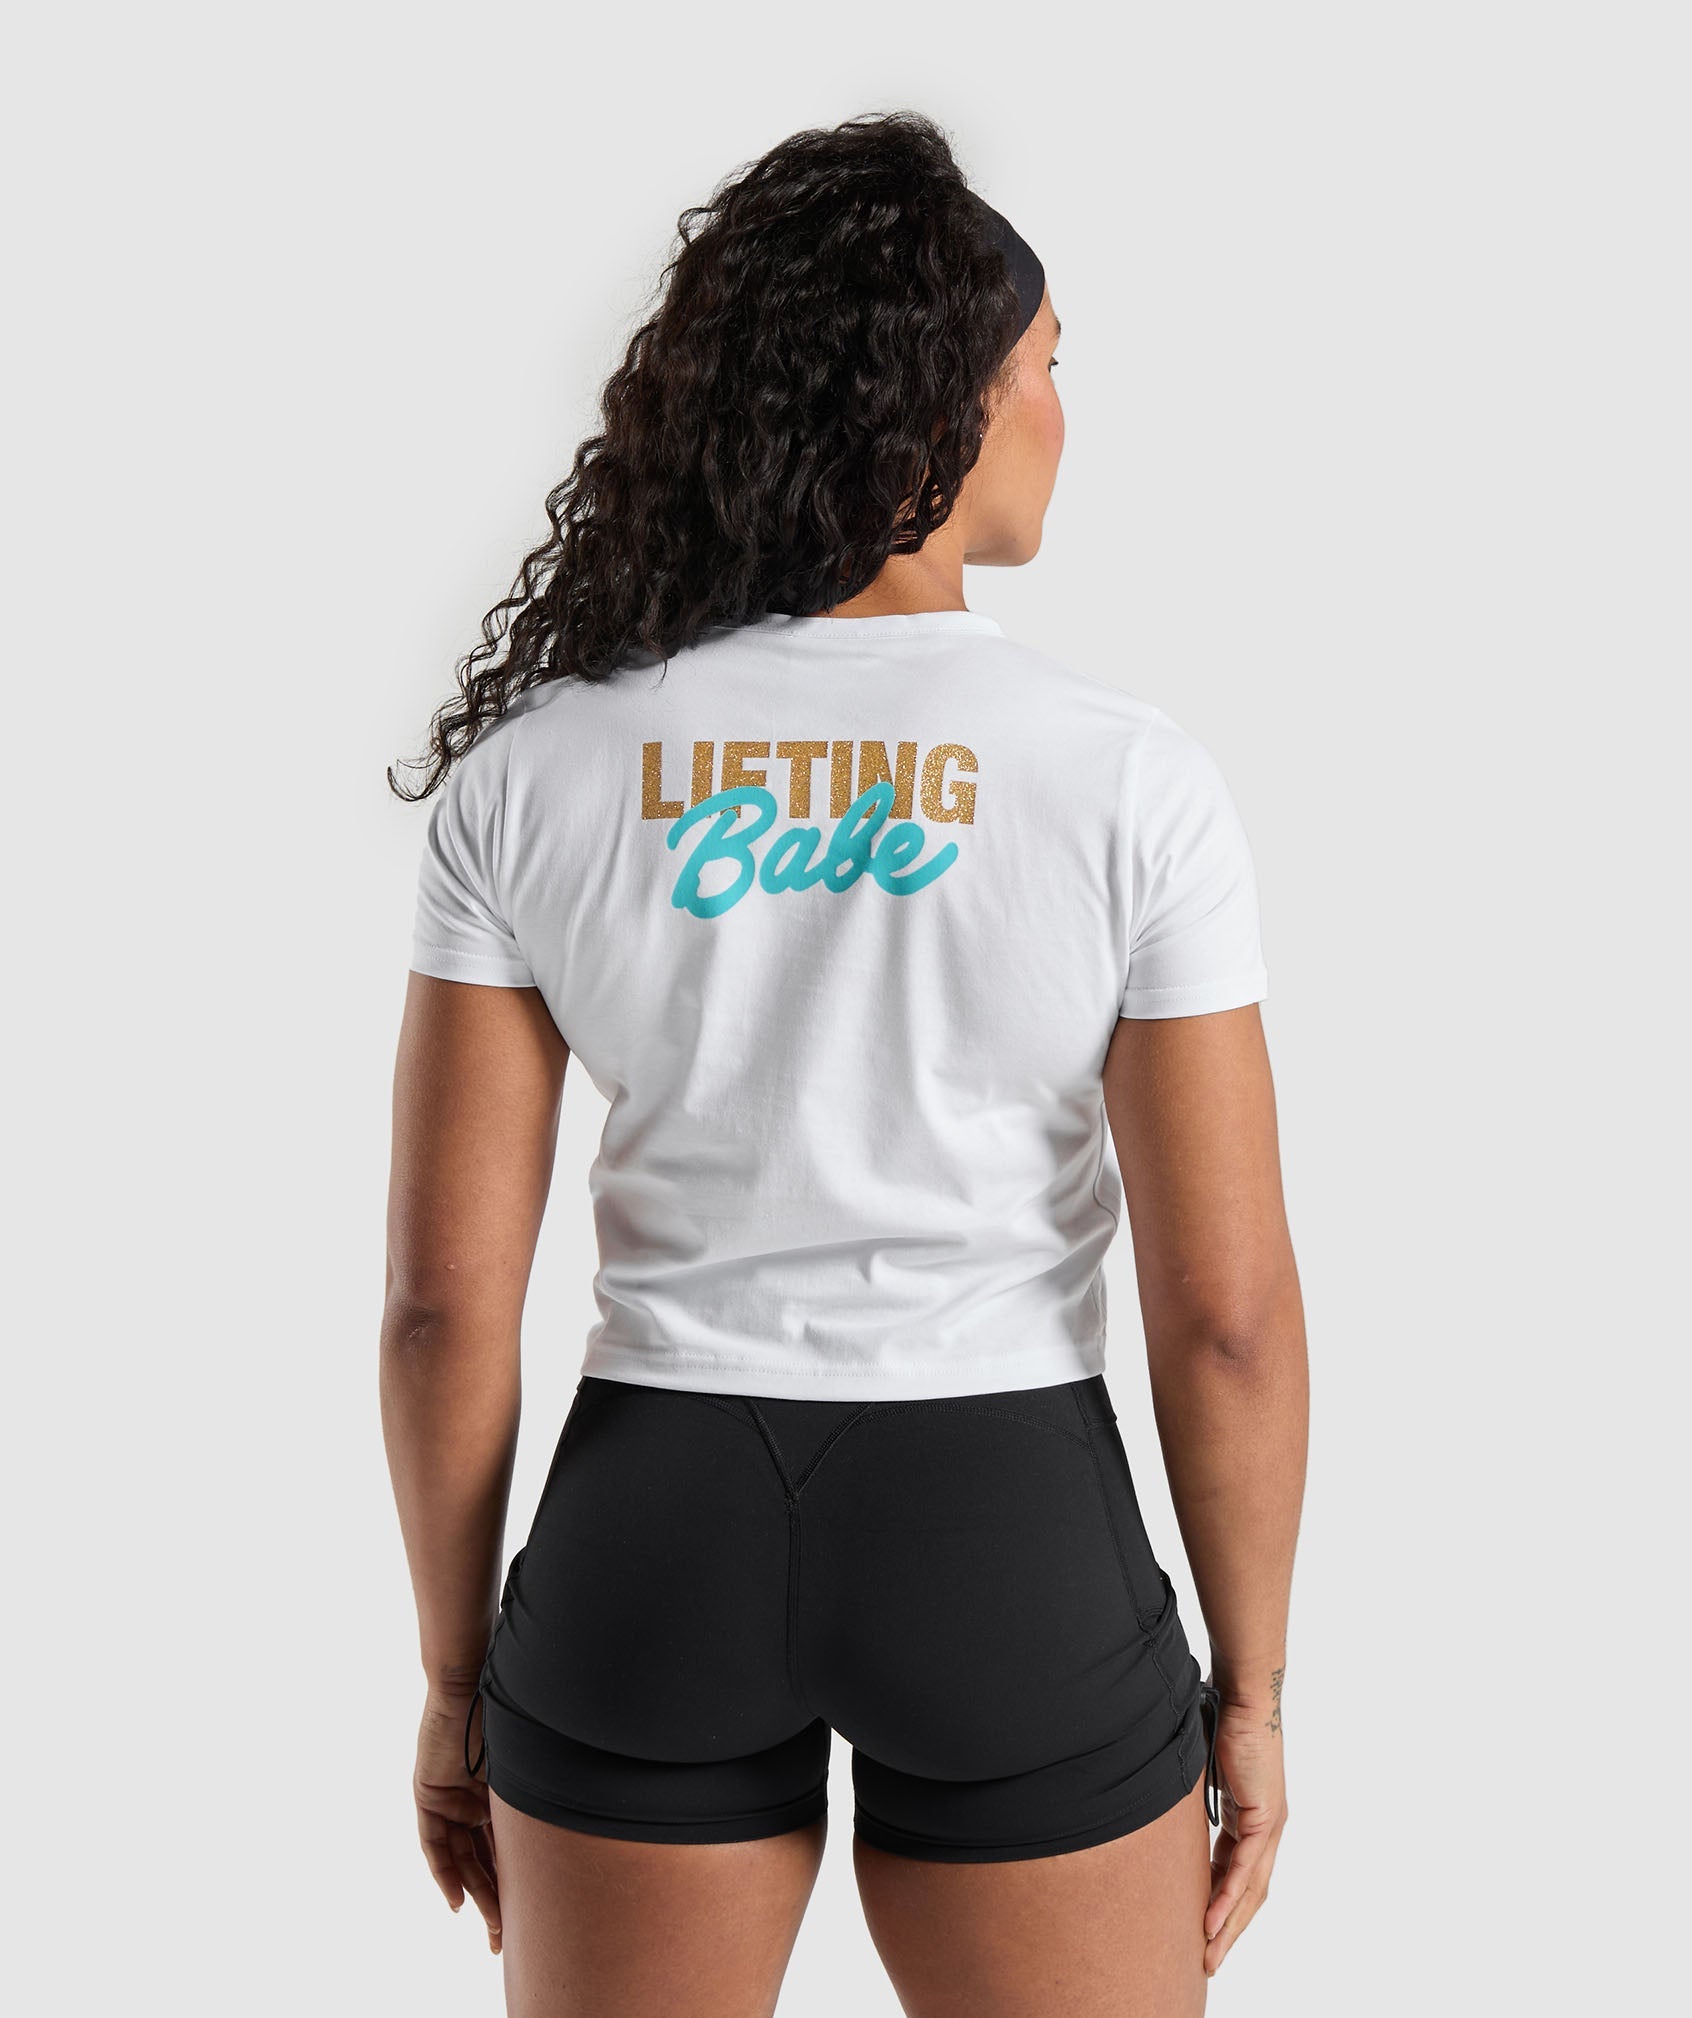 Lifting Babe Tee in White